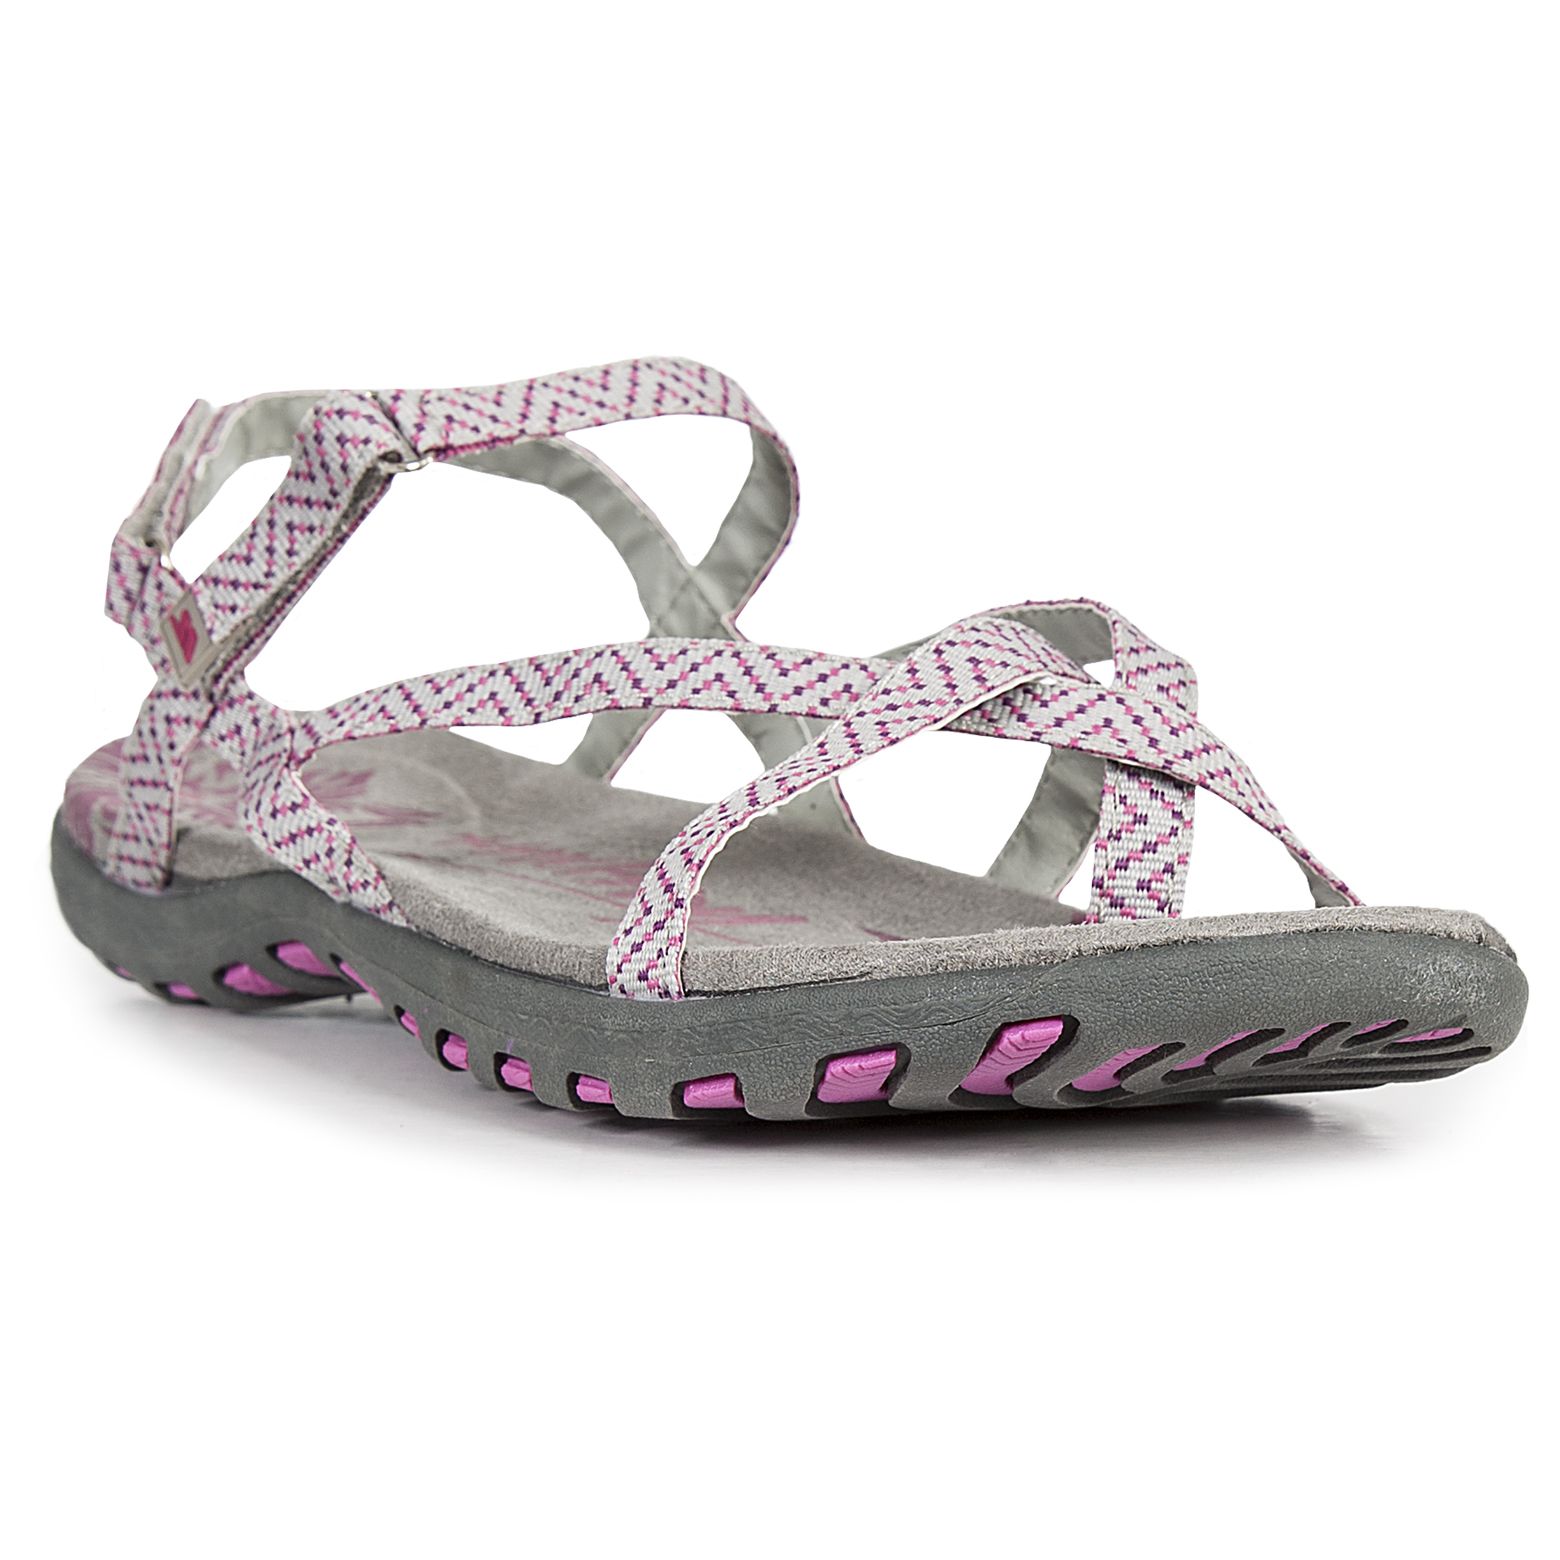 Gilly Womens Sandals